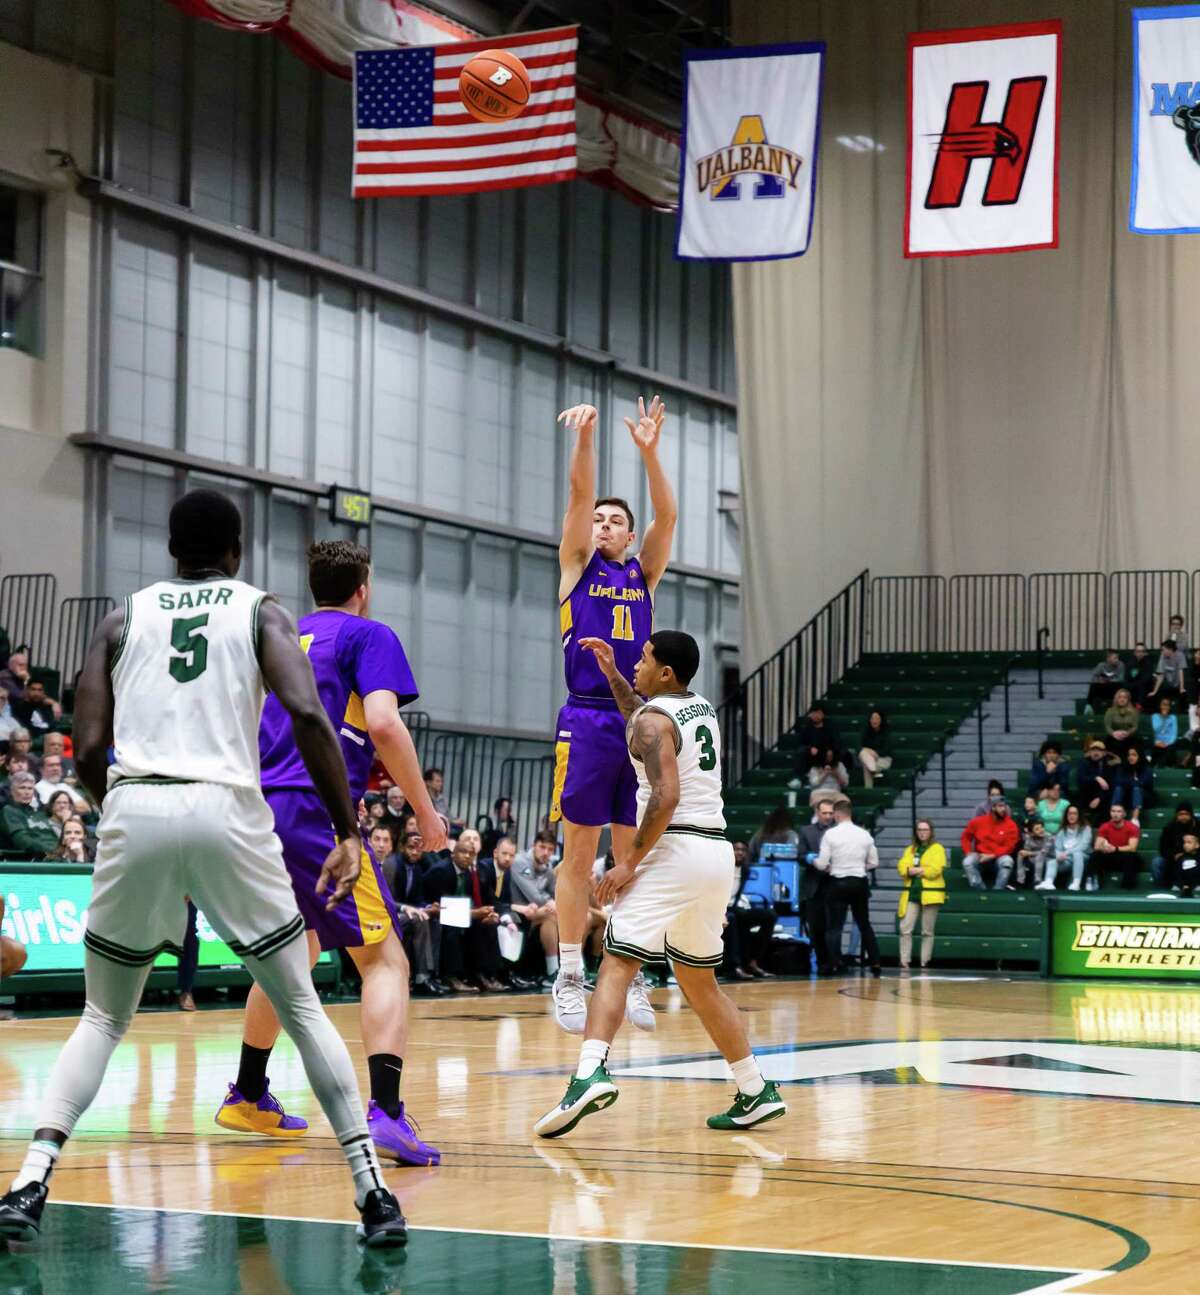 UAlbany's Cameron Healy shoots against Binghamton during their game Saturday, Jan. 4, 2020. (Courtesy of Brent Warzocha)